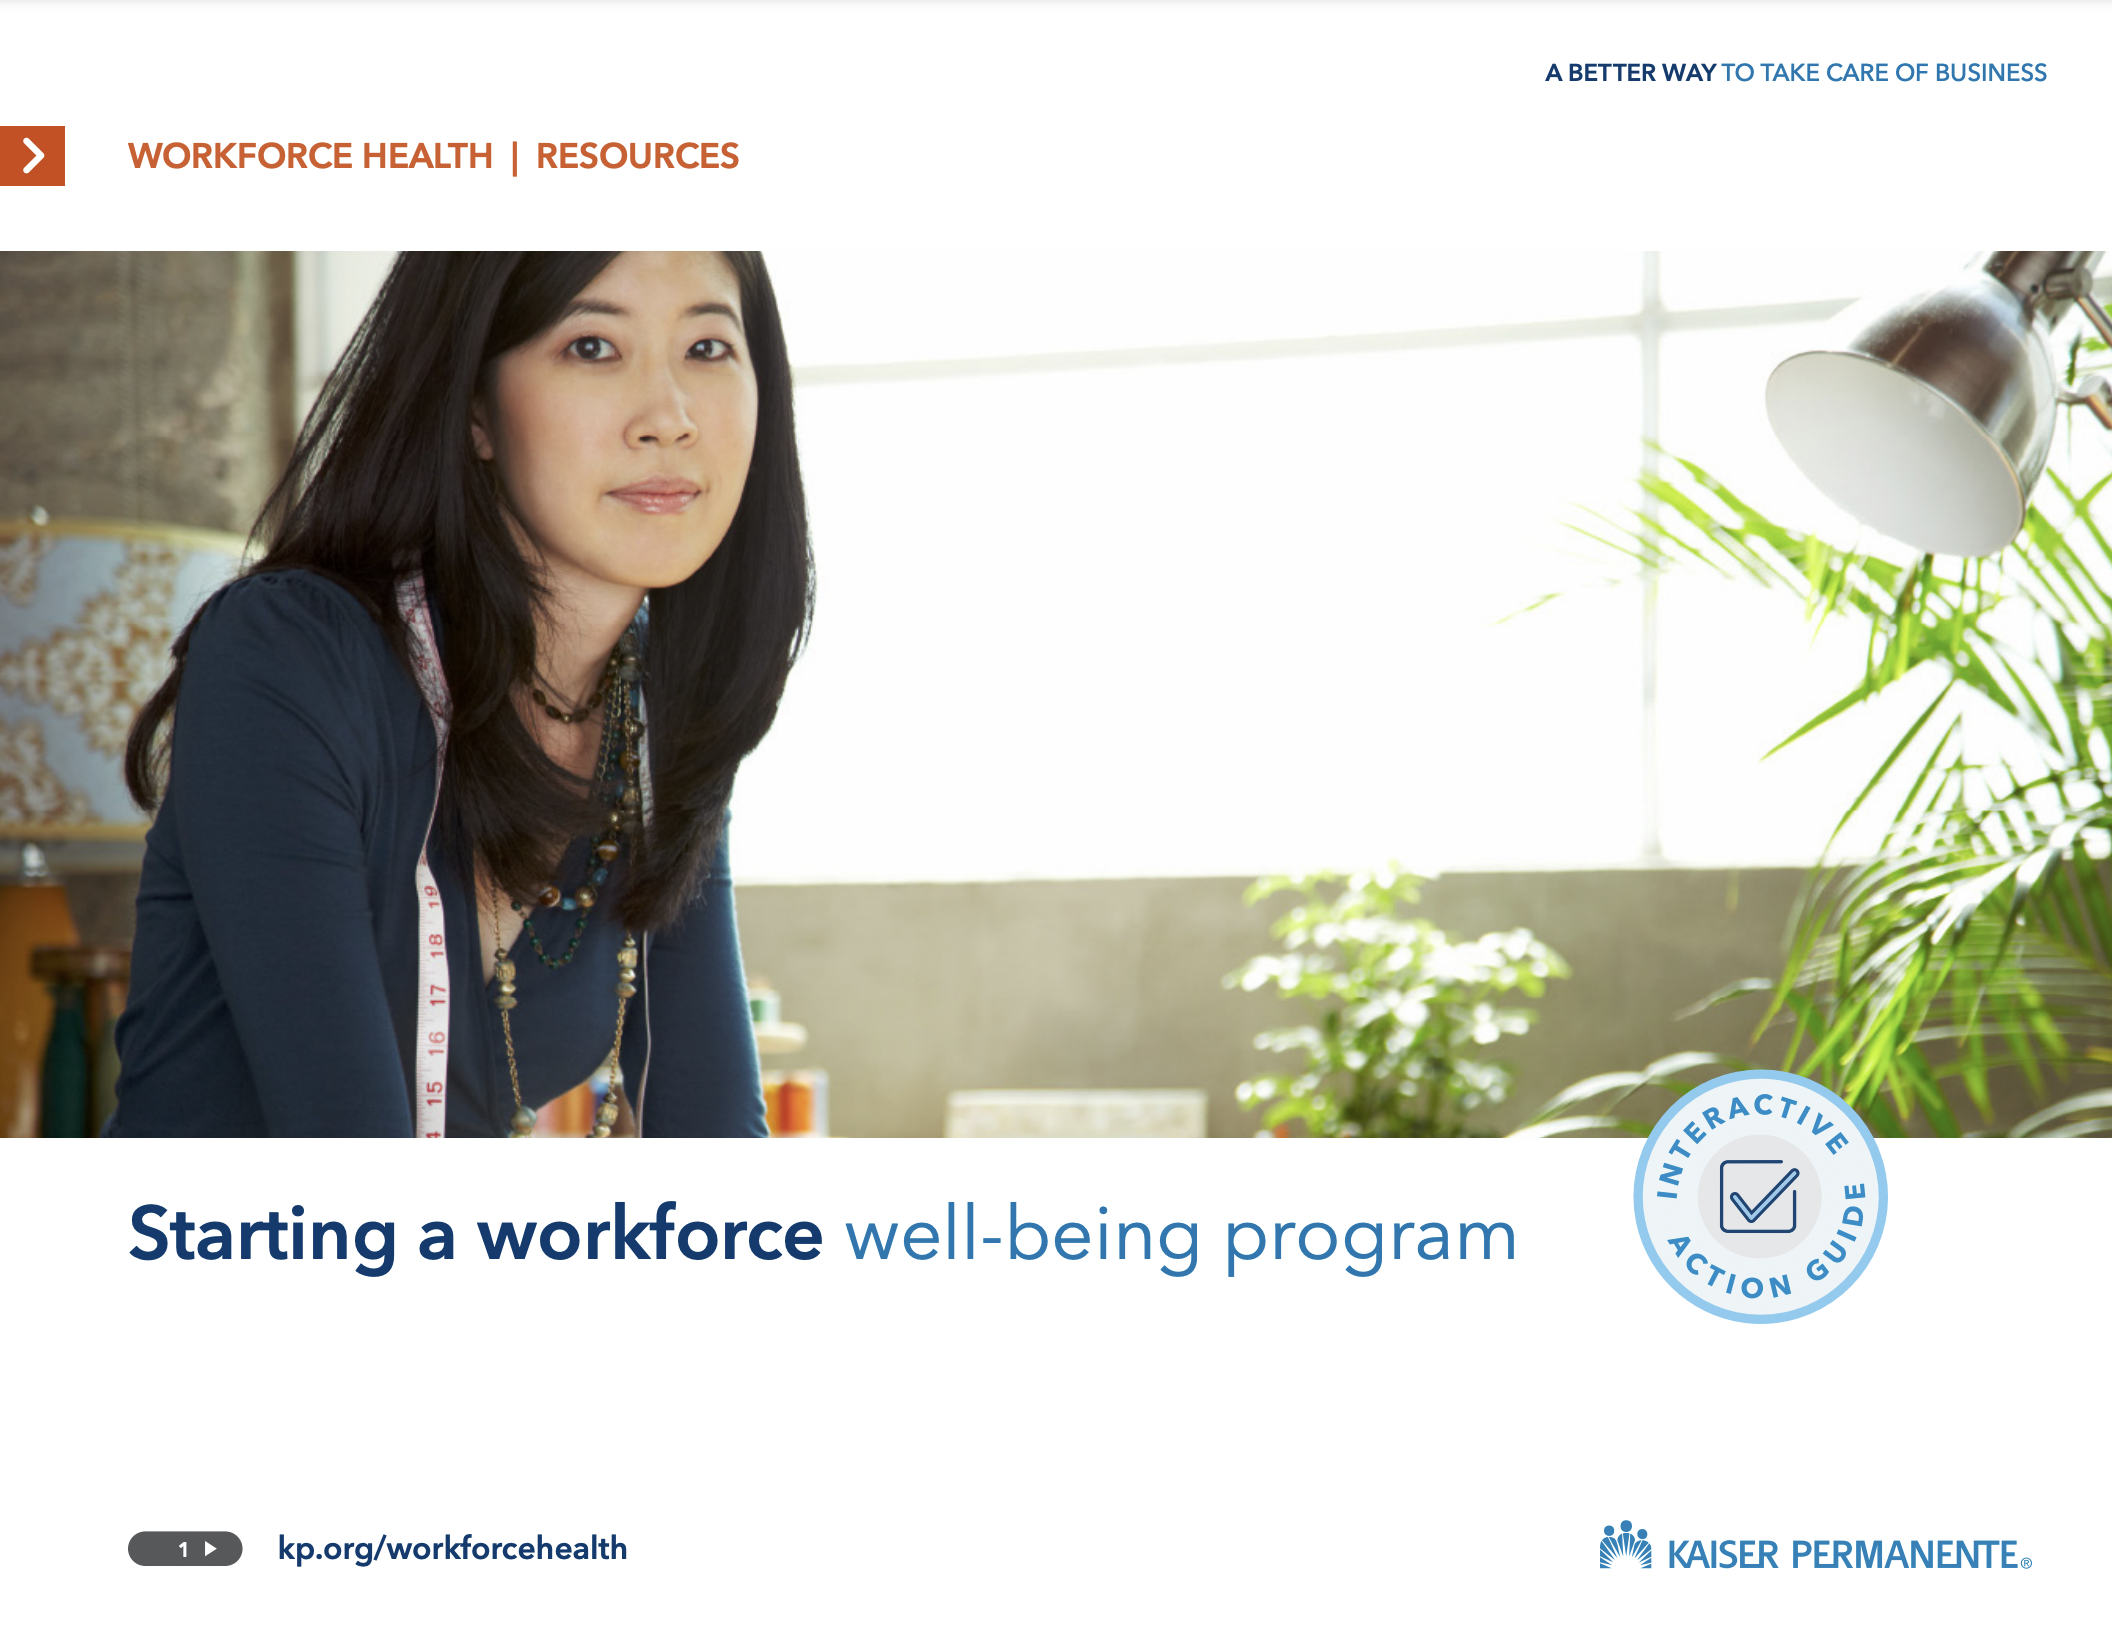 Starting a Workforce Well-Being Program Toolkit